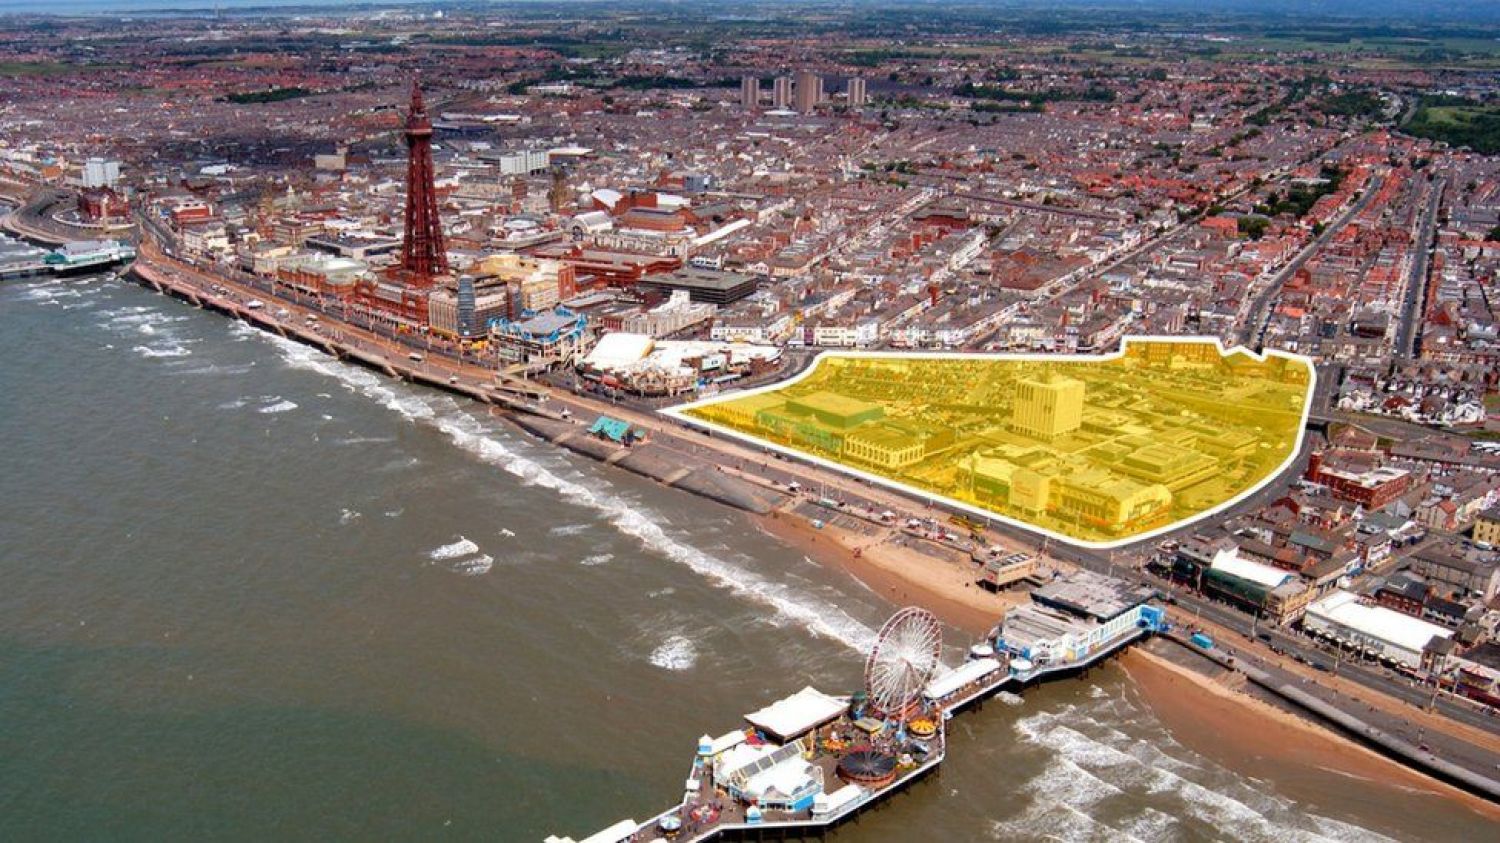 Blackpool Central could transform the town